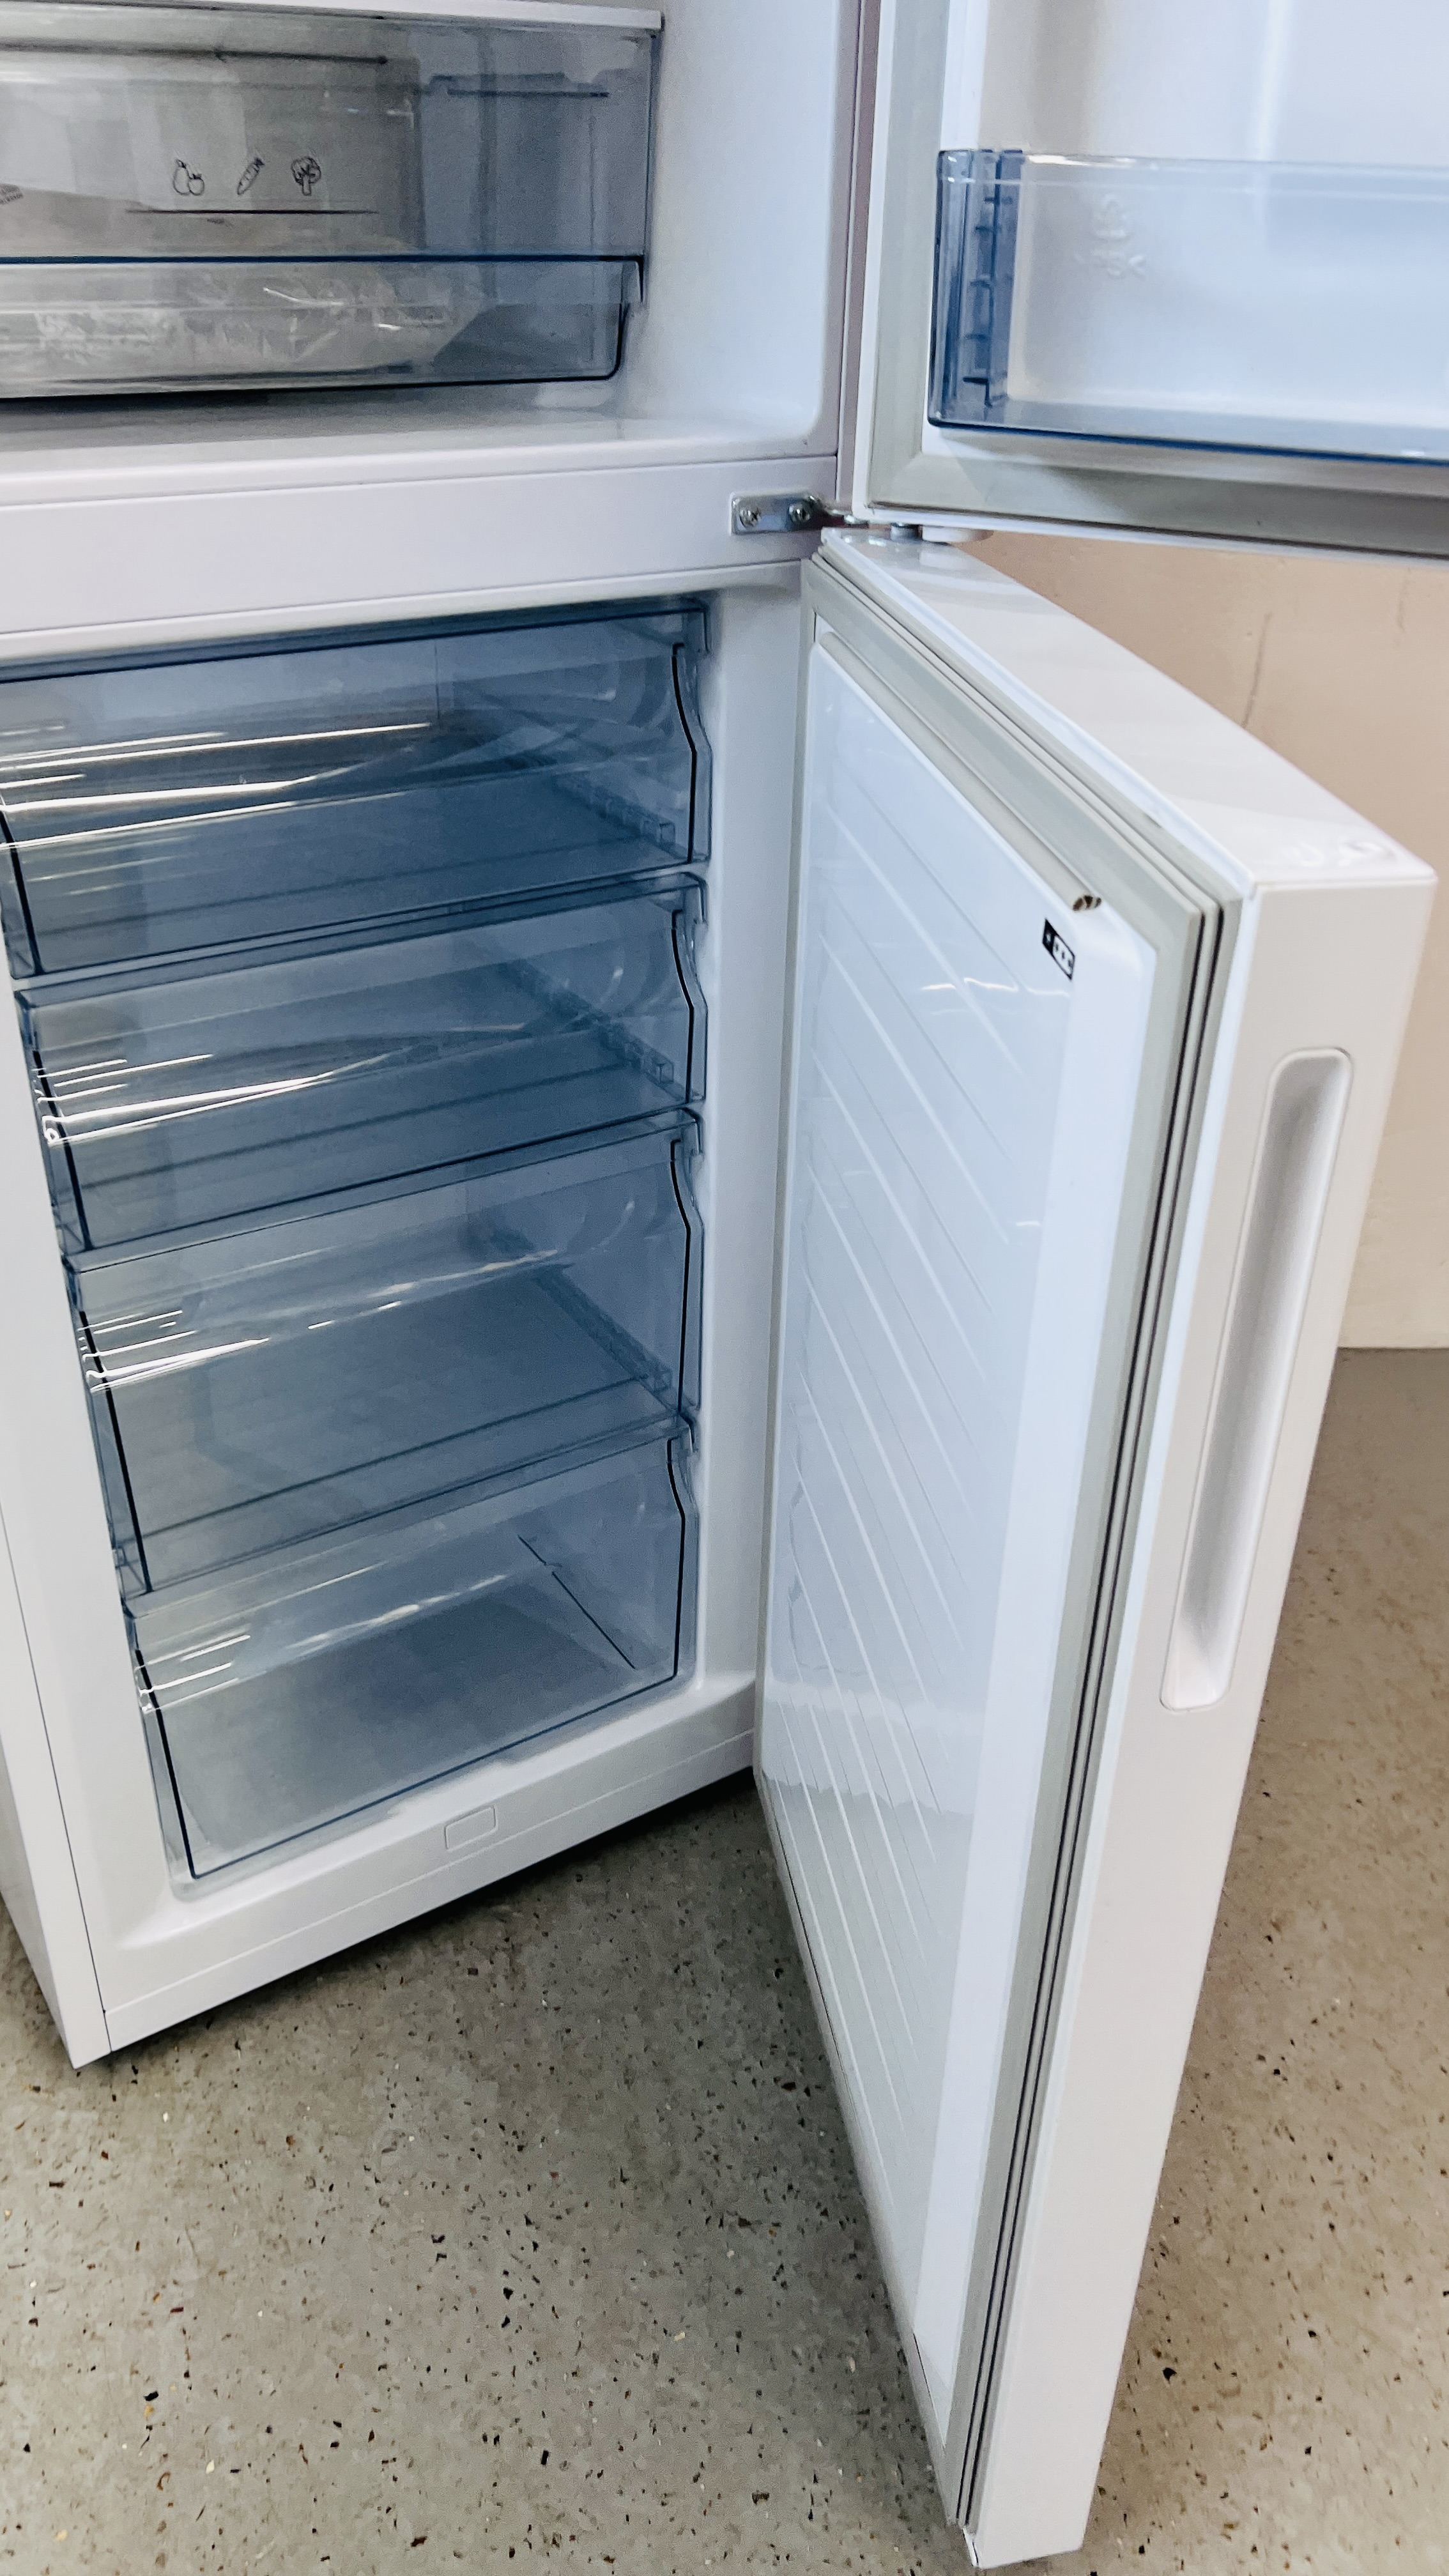 KENWOOD FROST FREE FRIDGE FREEZER WITH WATER DISPENSER - SOLD AS SEEN. - Image 11 of 11